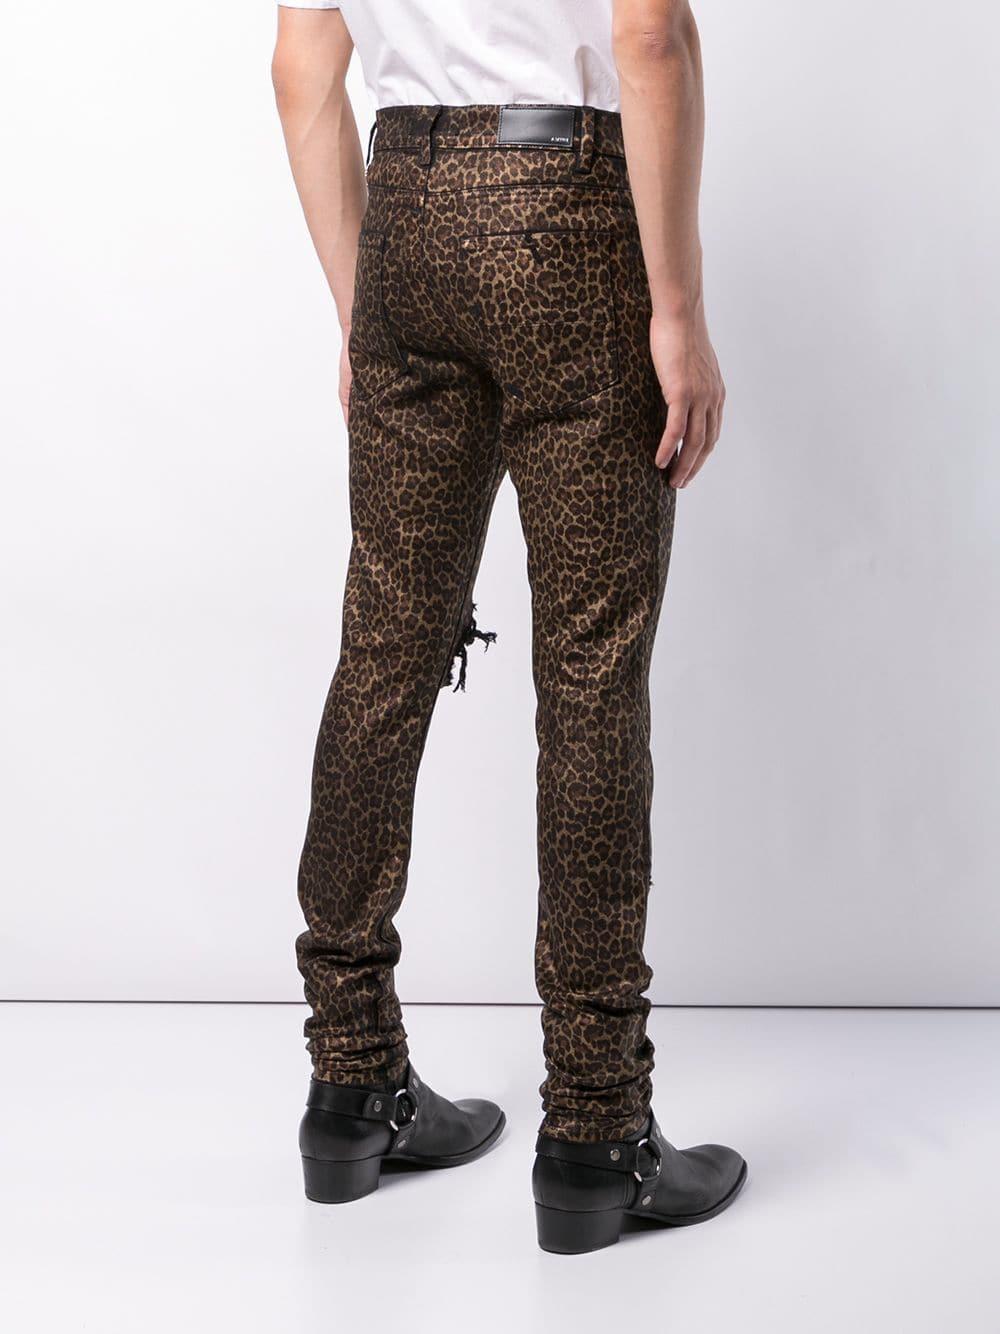 French Connection Simba Leopard Print Skinny Pants, $118 | Off 5th |  Lookastic